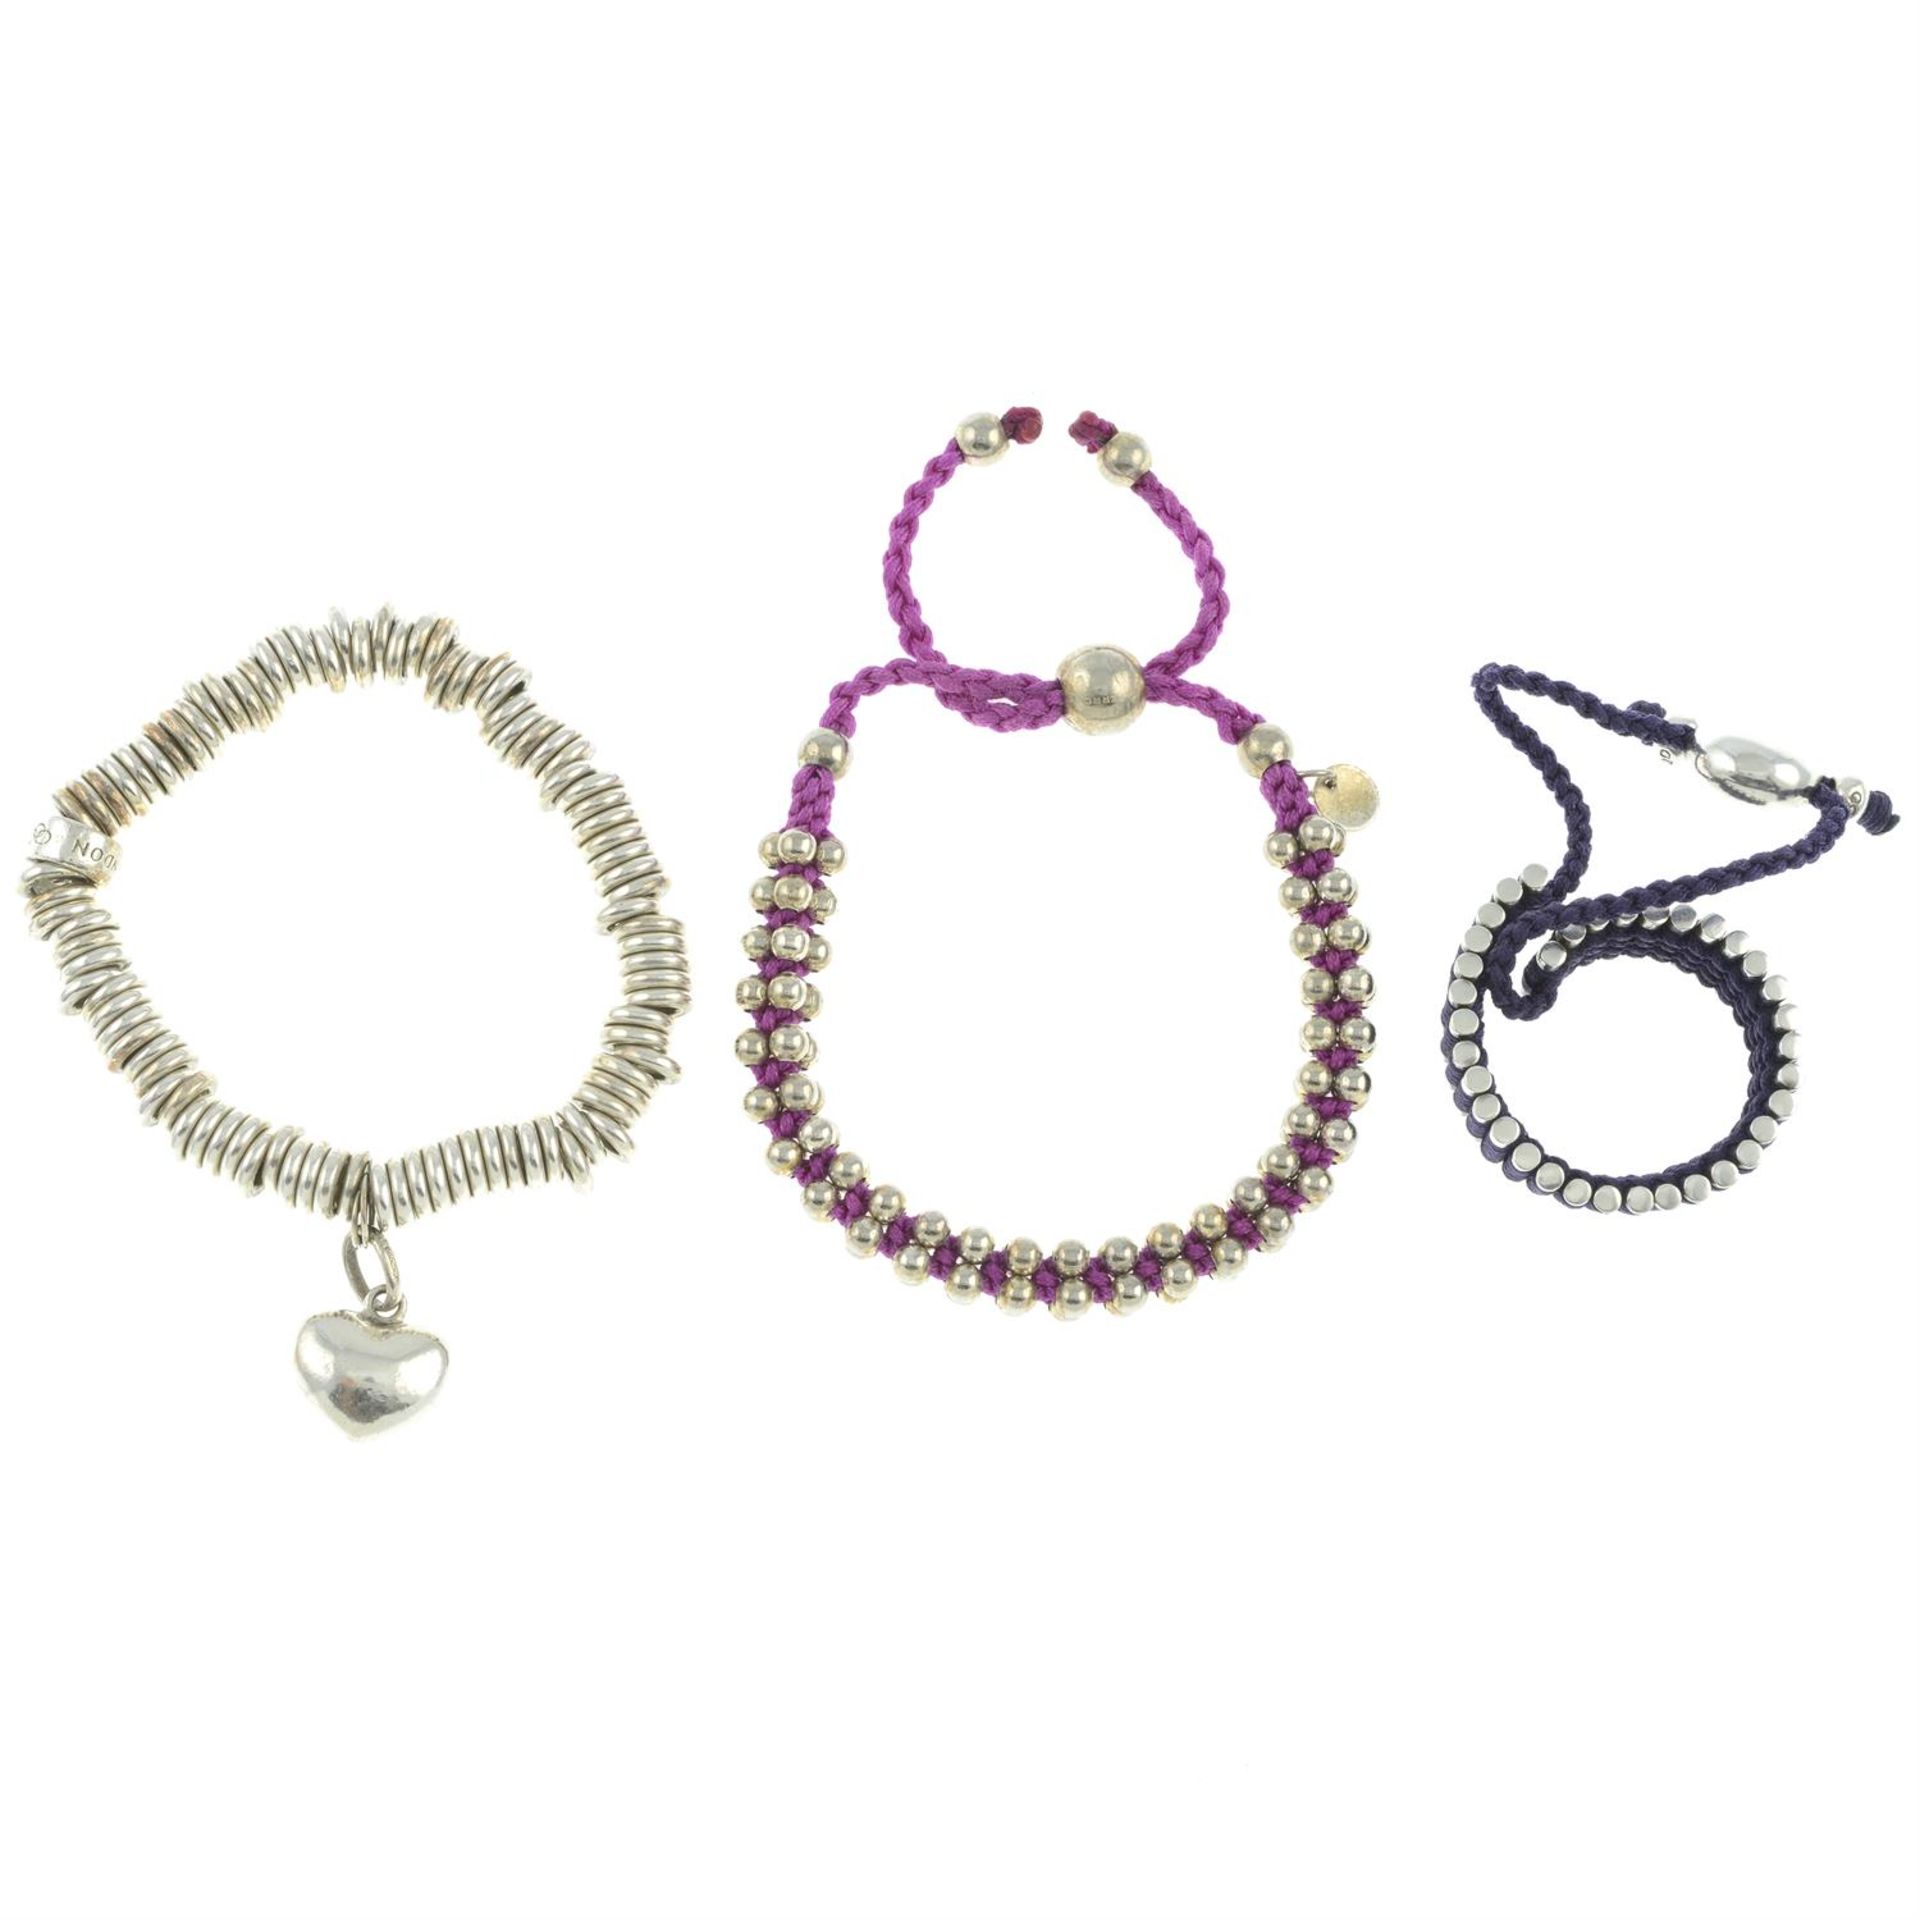 Three bracelets, two by Links of London